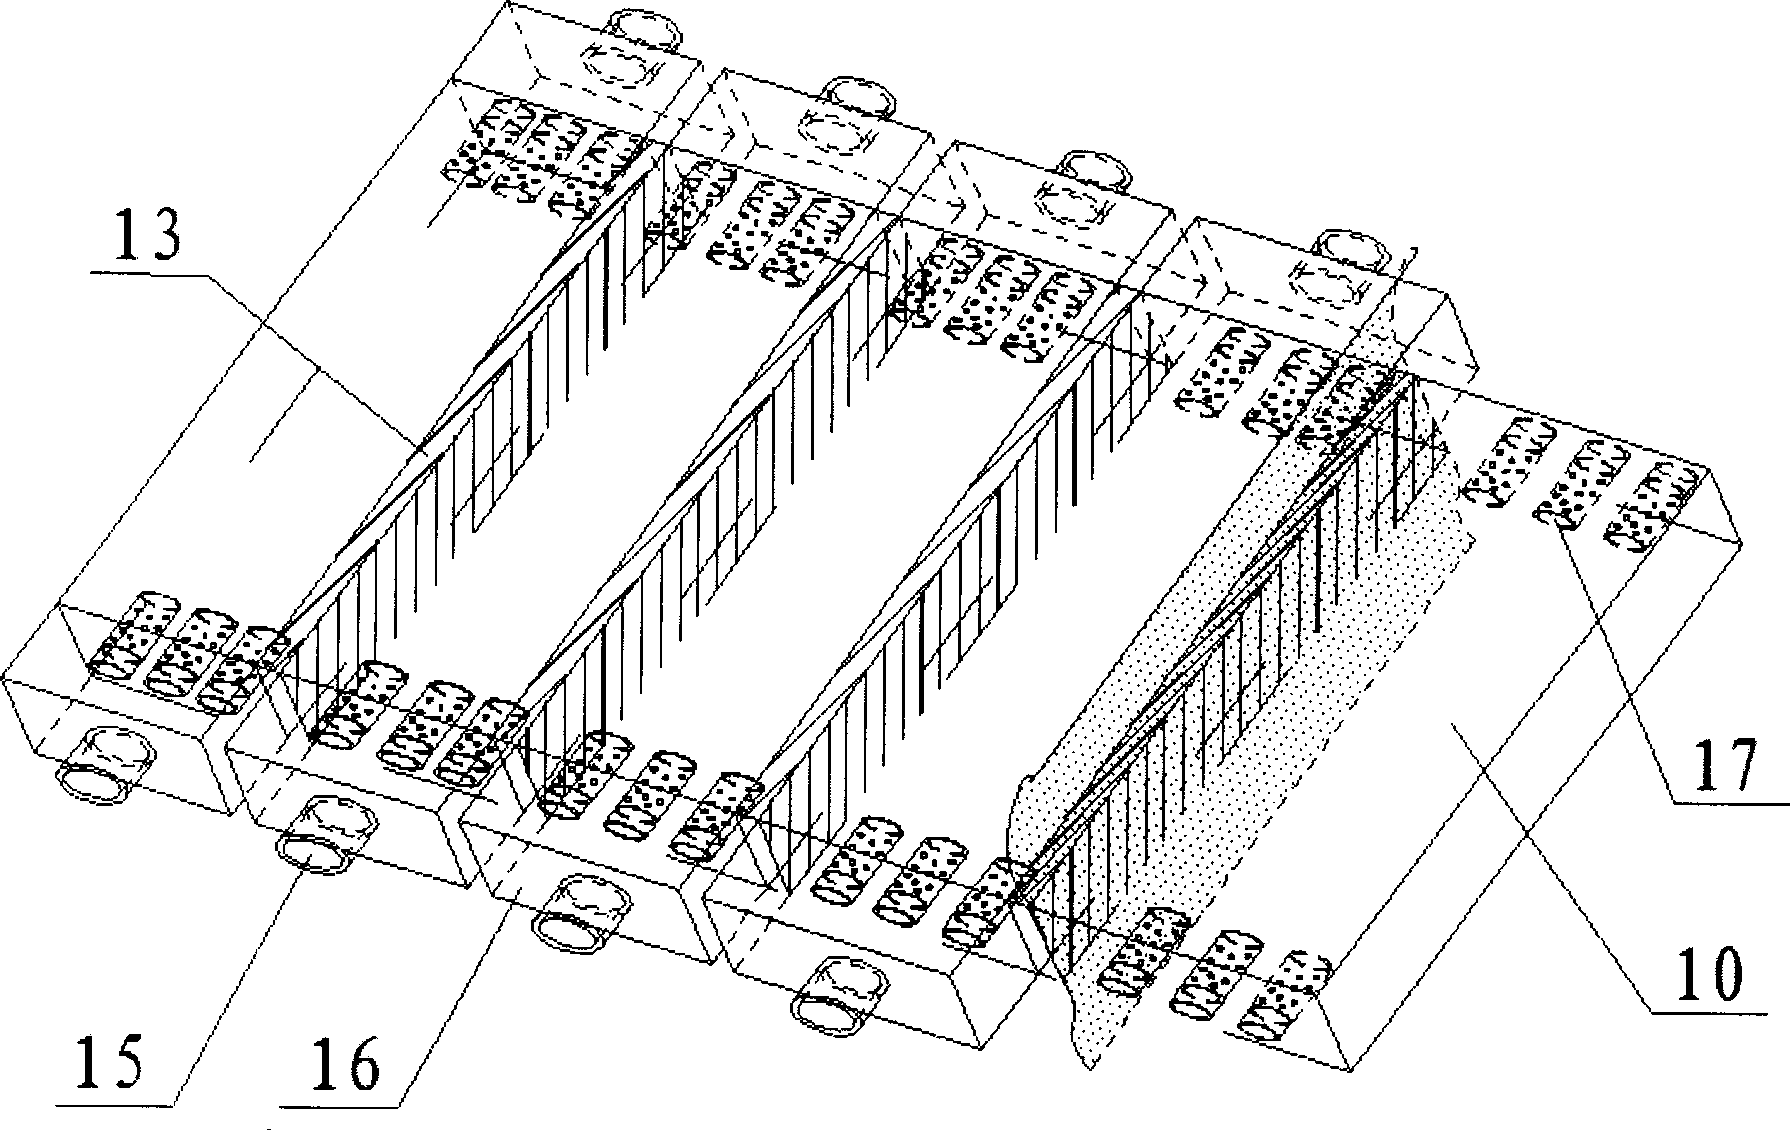 Porous thermal conductive asphalt concrete pavement heat exchange system and use thereof